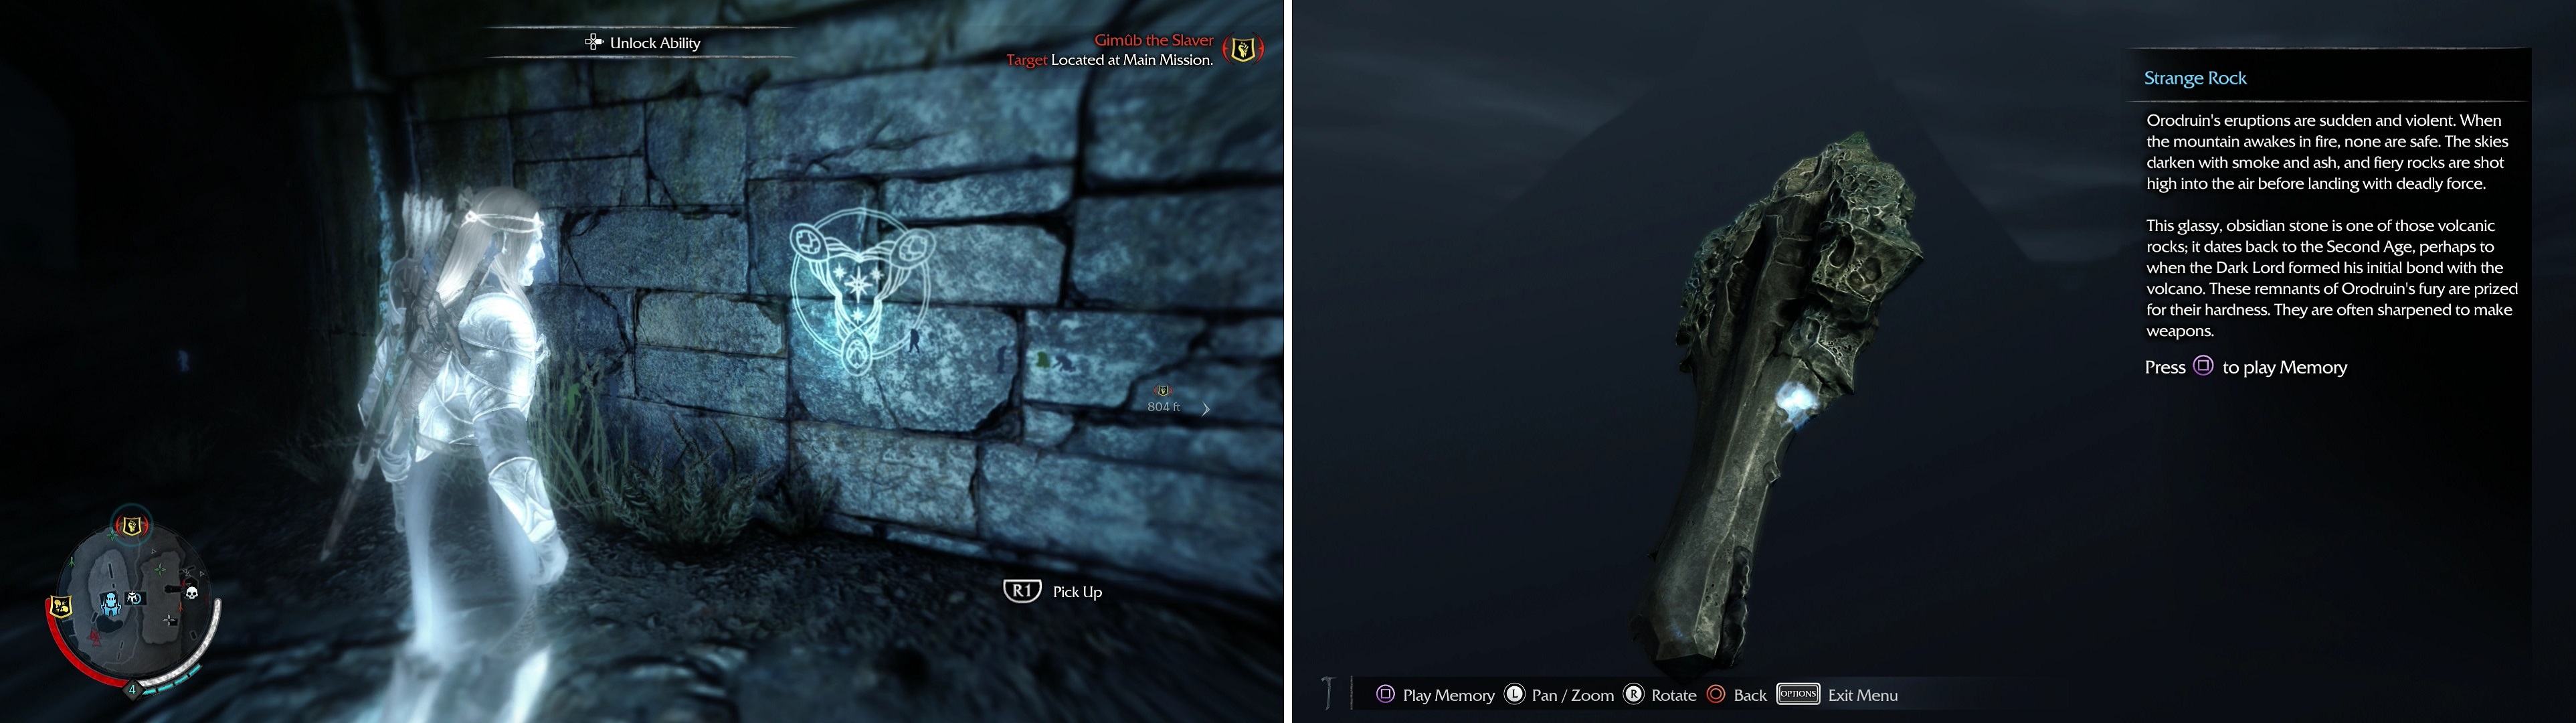 Ithildin (left) and Artifacts (right) are two more collectibles that can be found scattered throughout Mordor. Reforge Forge Towers and follow the white map markers to their locations.